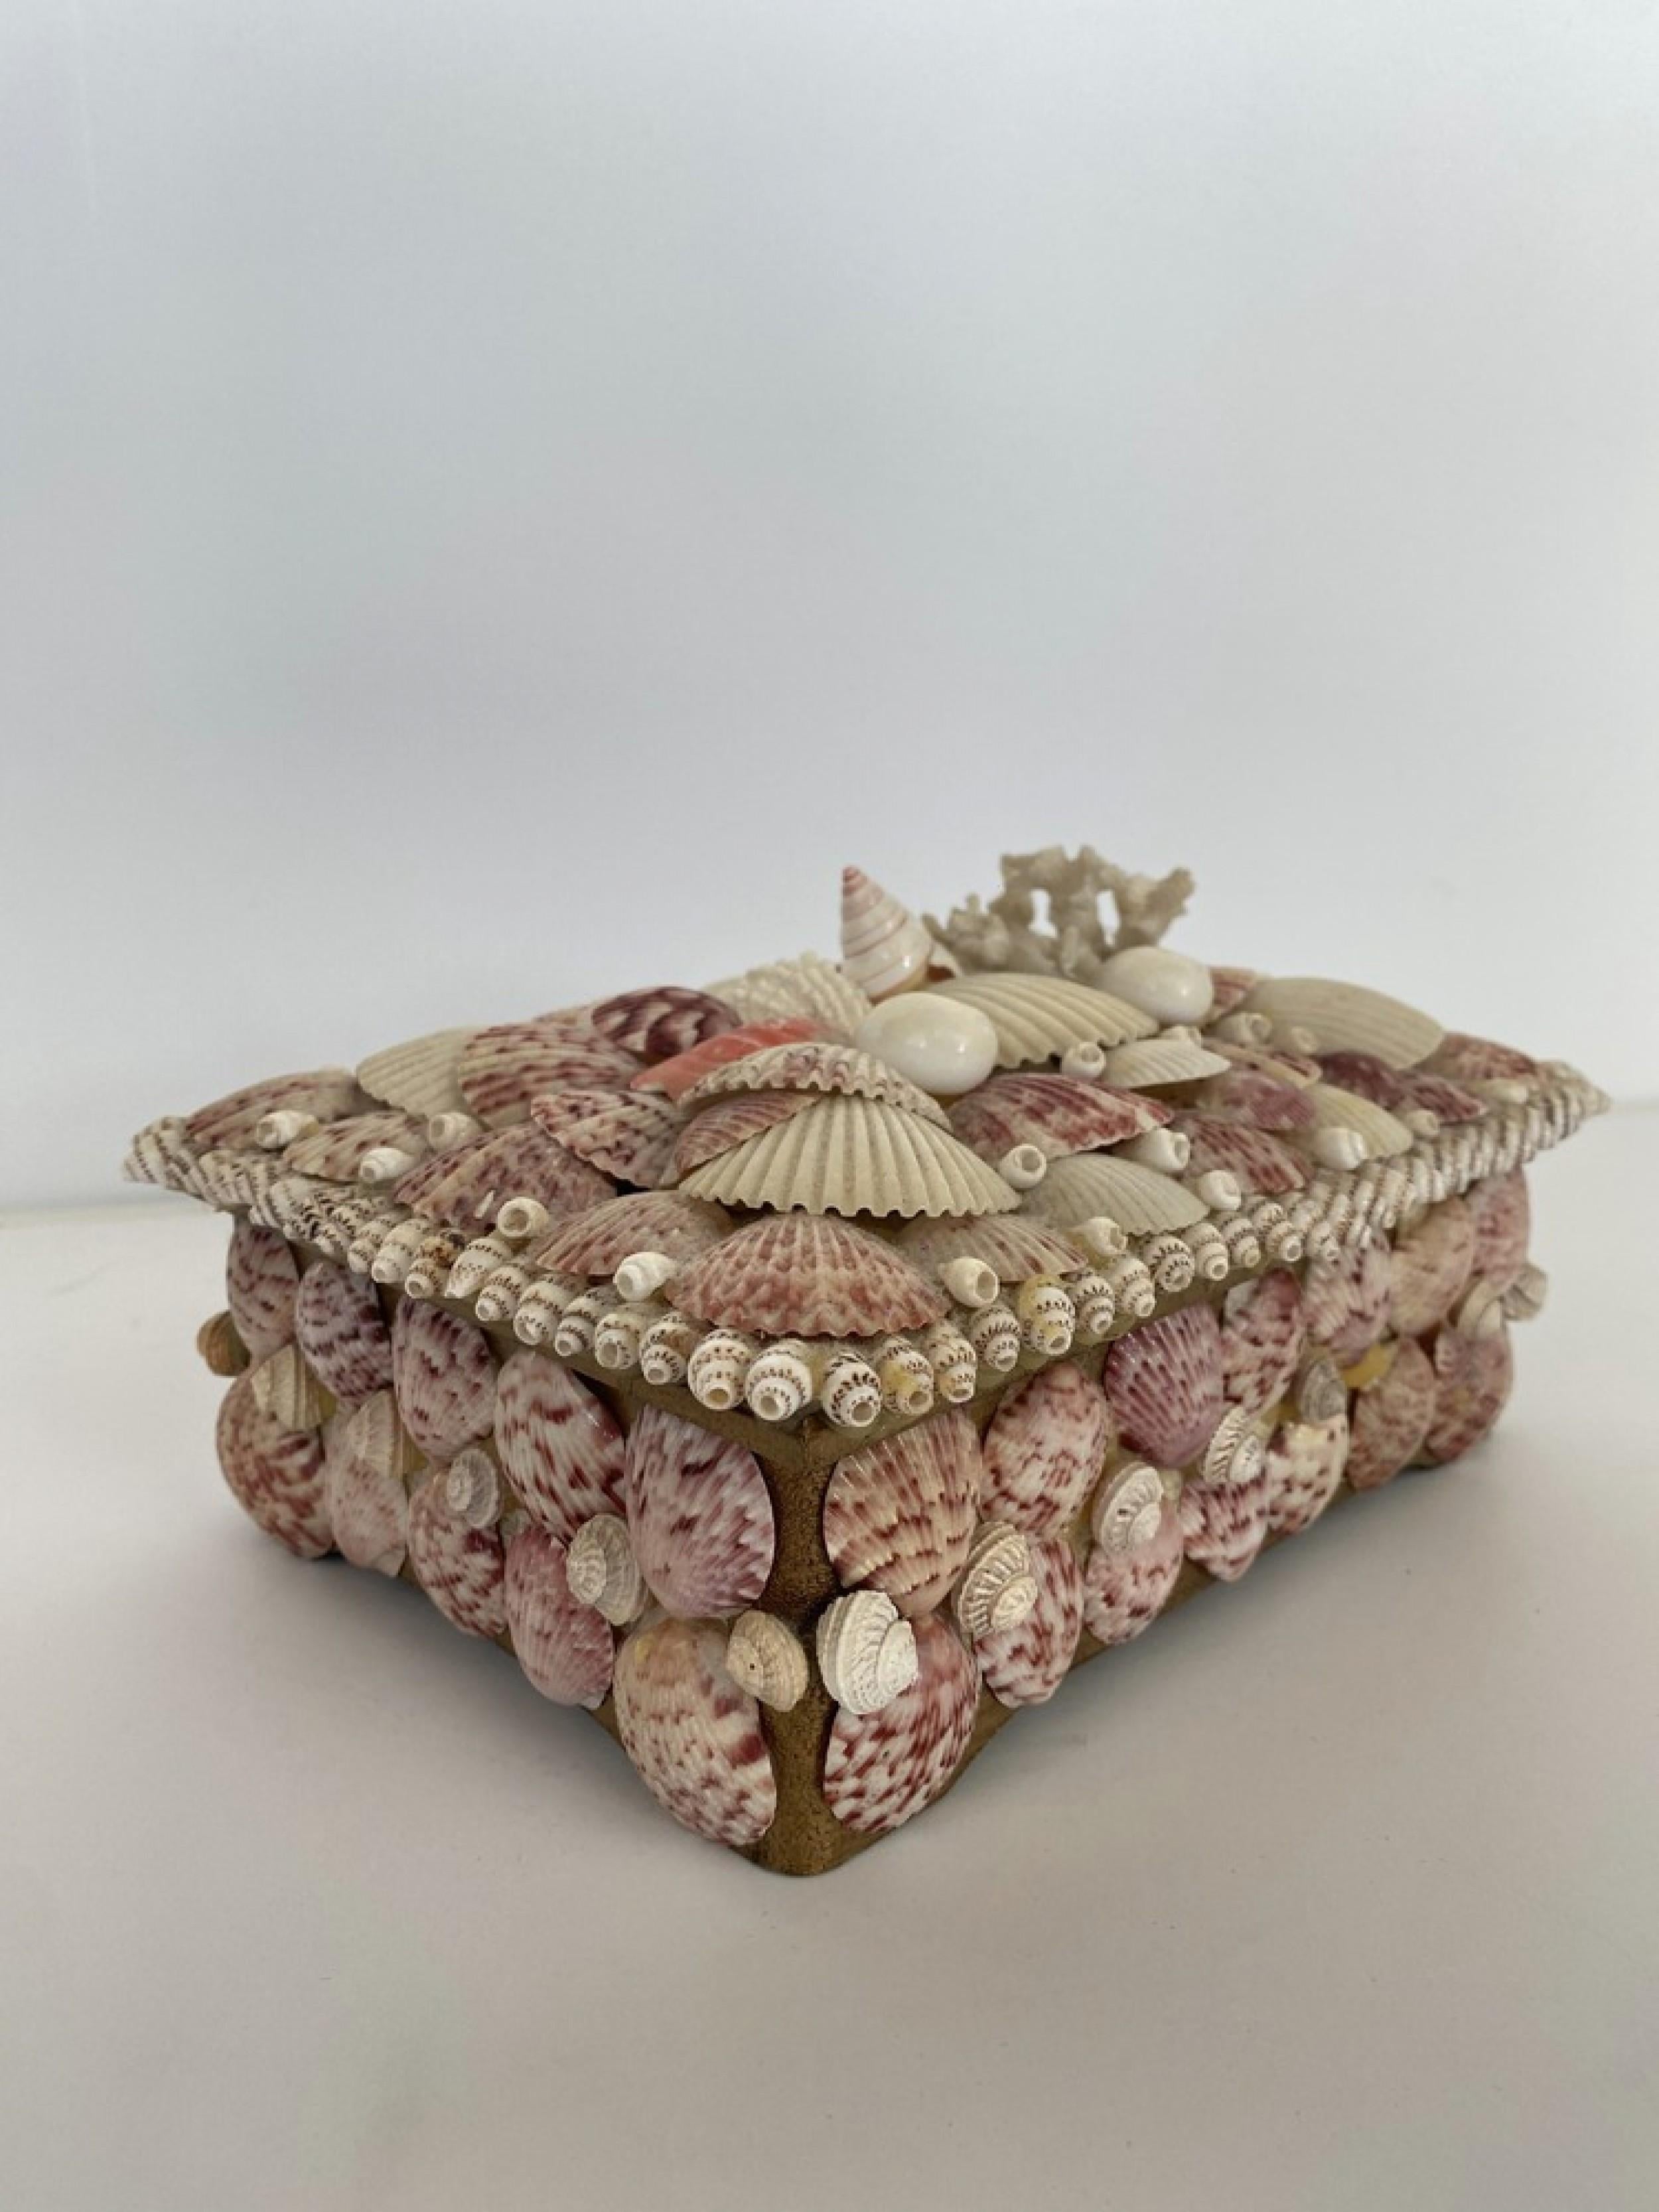 Contemporary American Modern Seashell Music Box / Jewelry Box In Good Condition For Sale In New York, NY